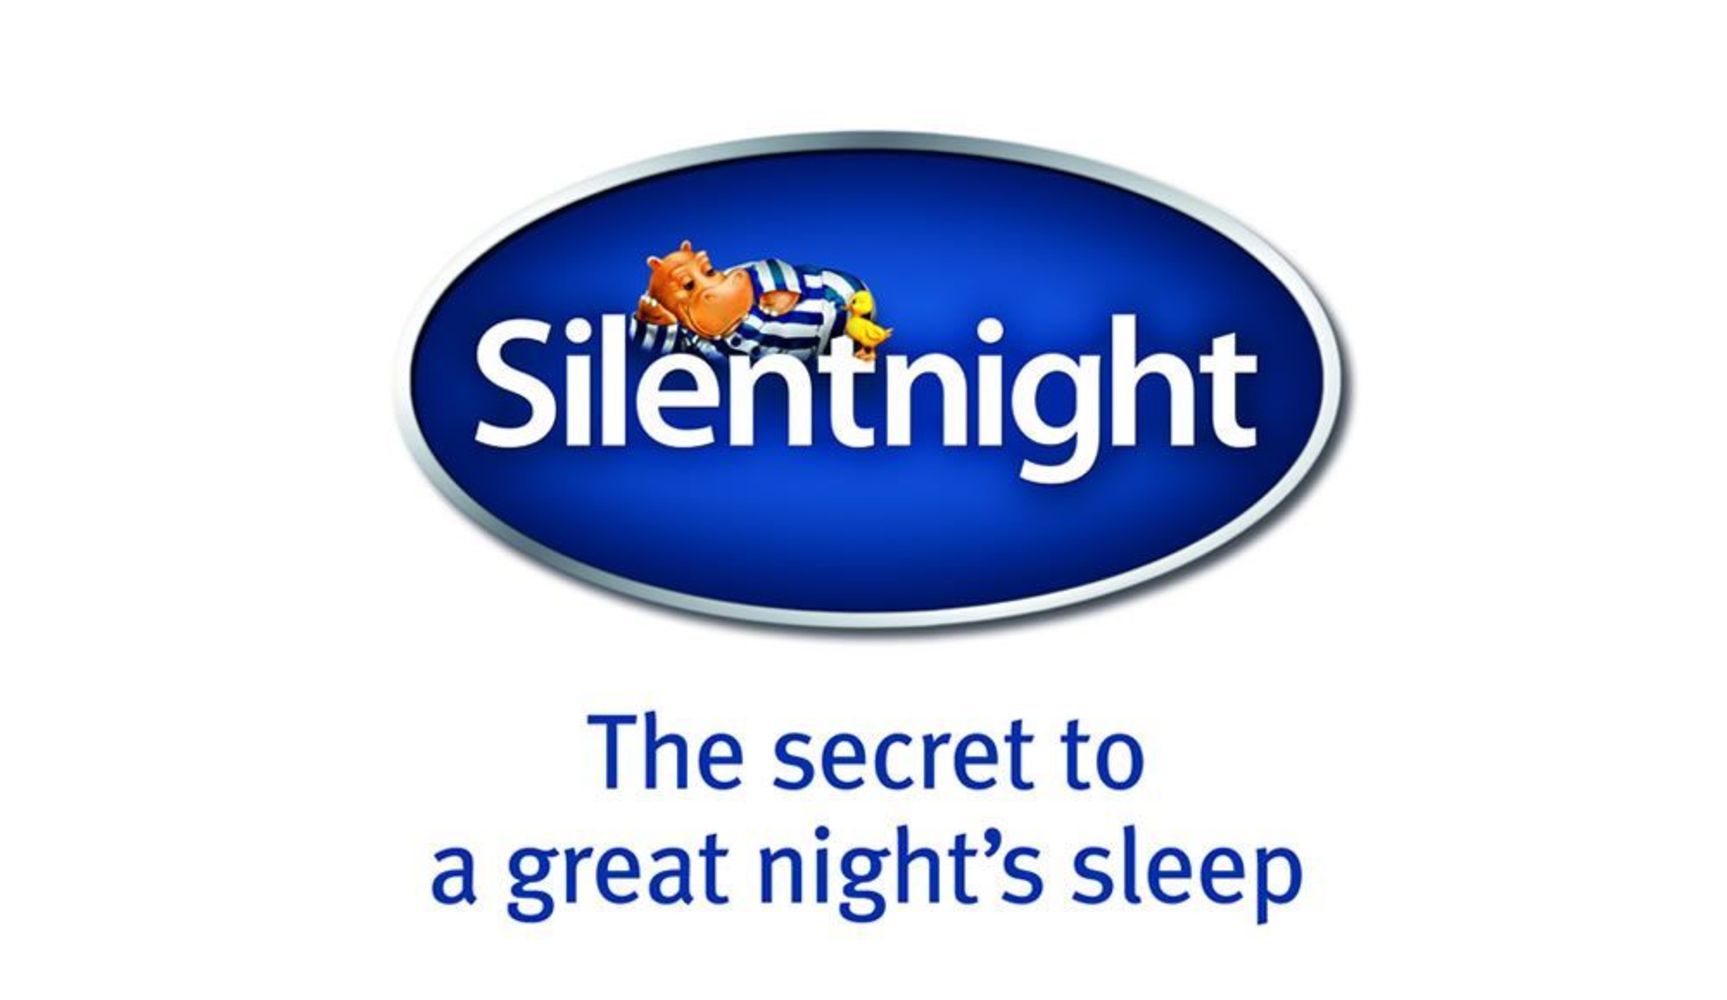 Brand New Bedding from Silent Night